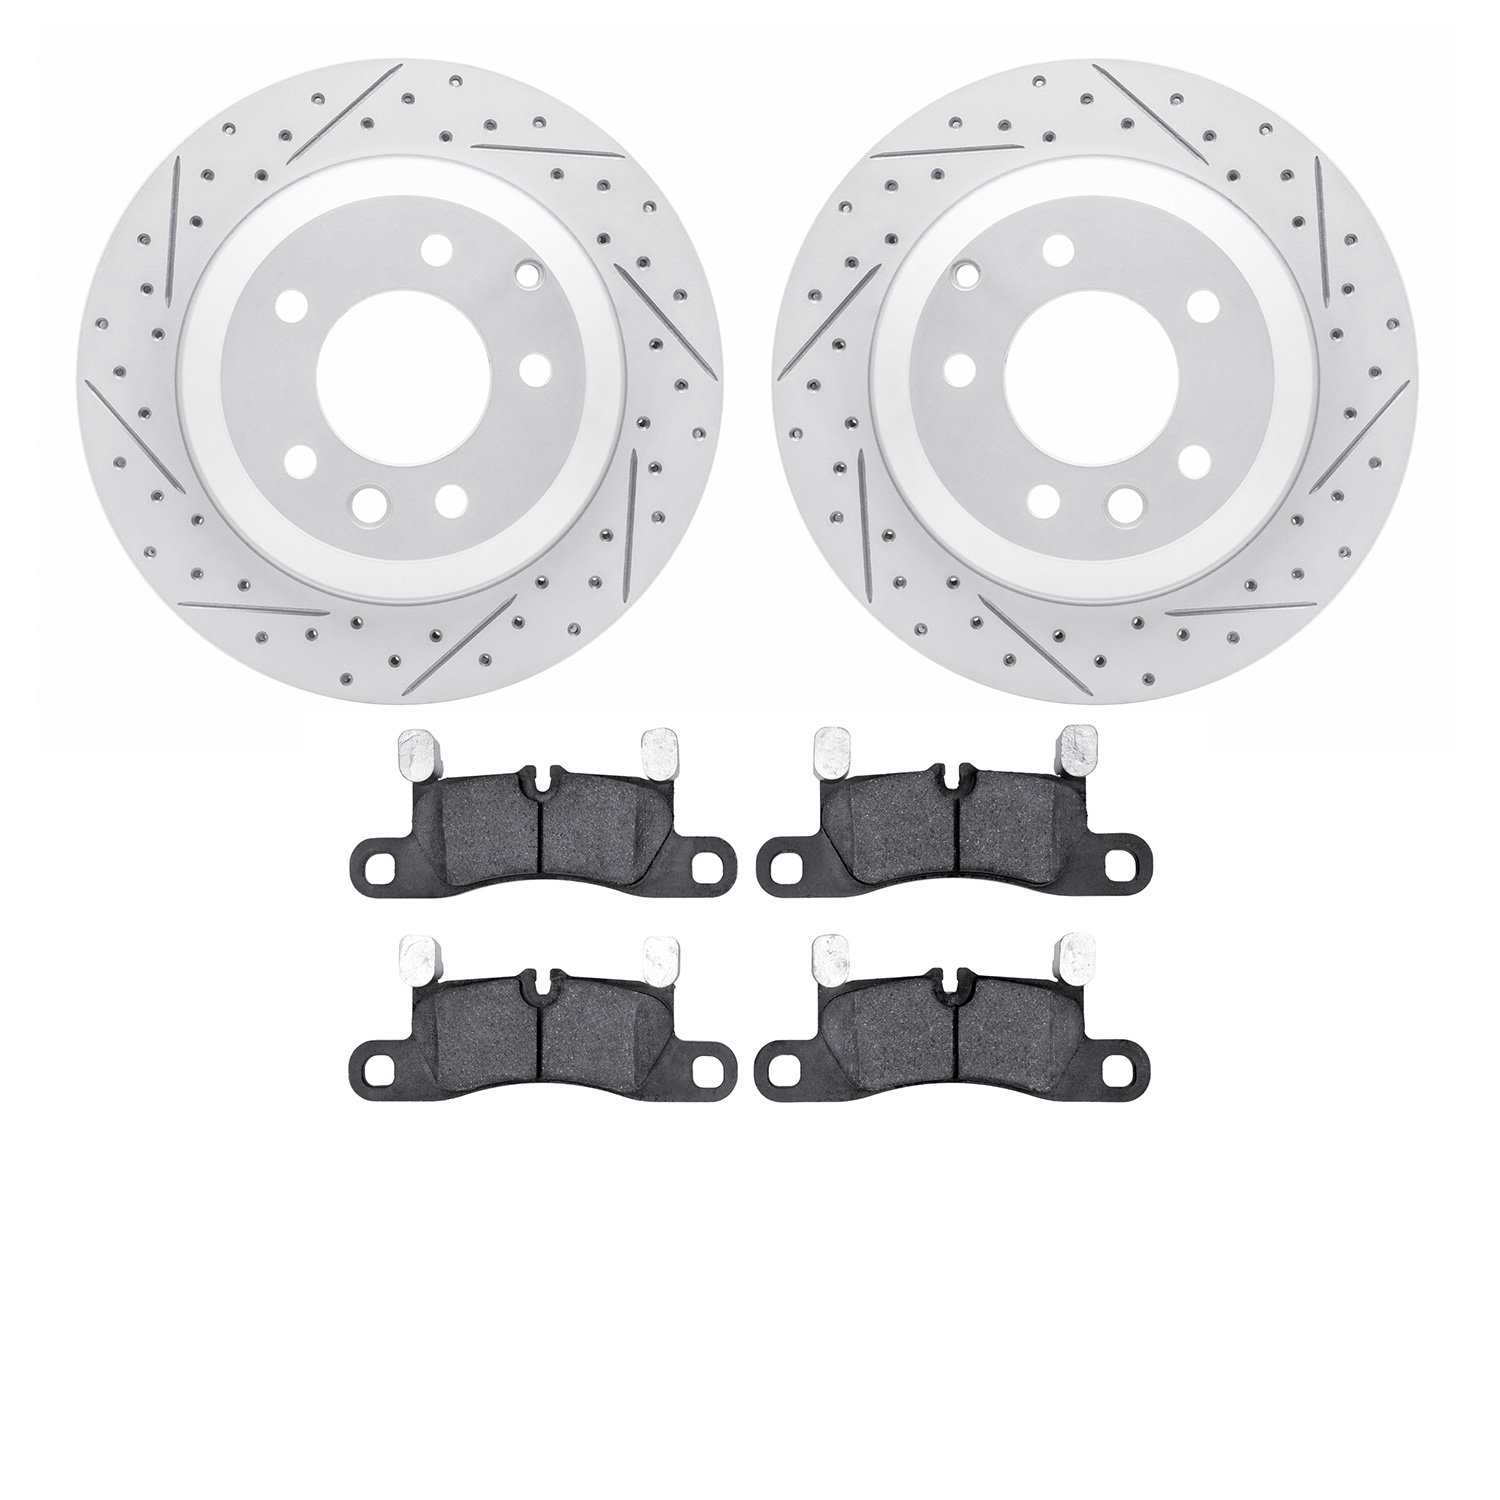 2502-74065 Geoperformance Drilled/Slotted Rotors w/5000 Advanced Brake Pads Kit, 2011-2018 Multiple Makes/Models, Position: Rear